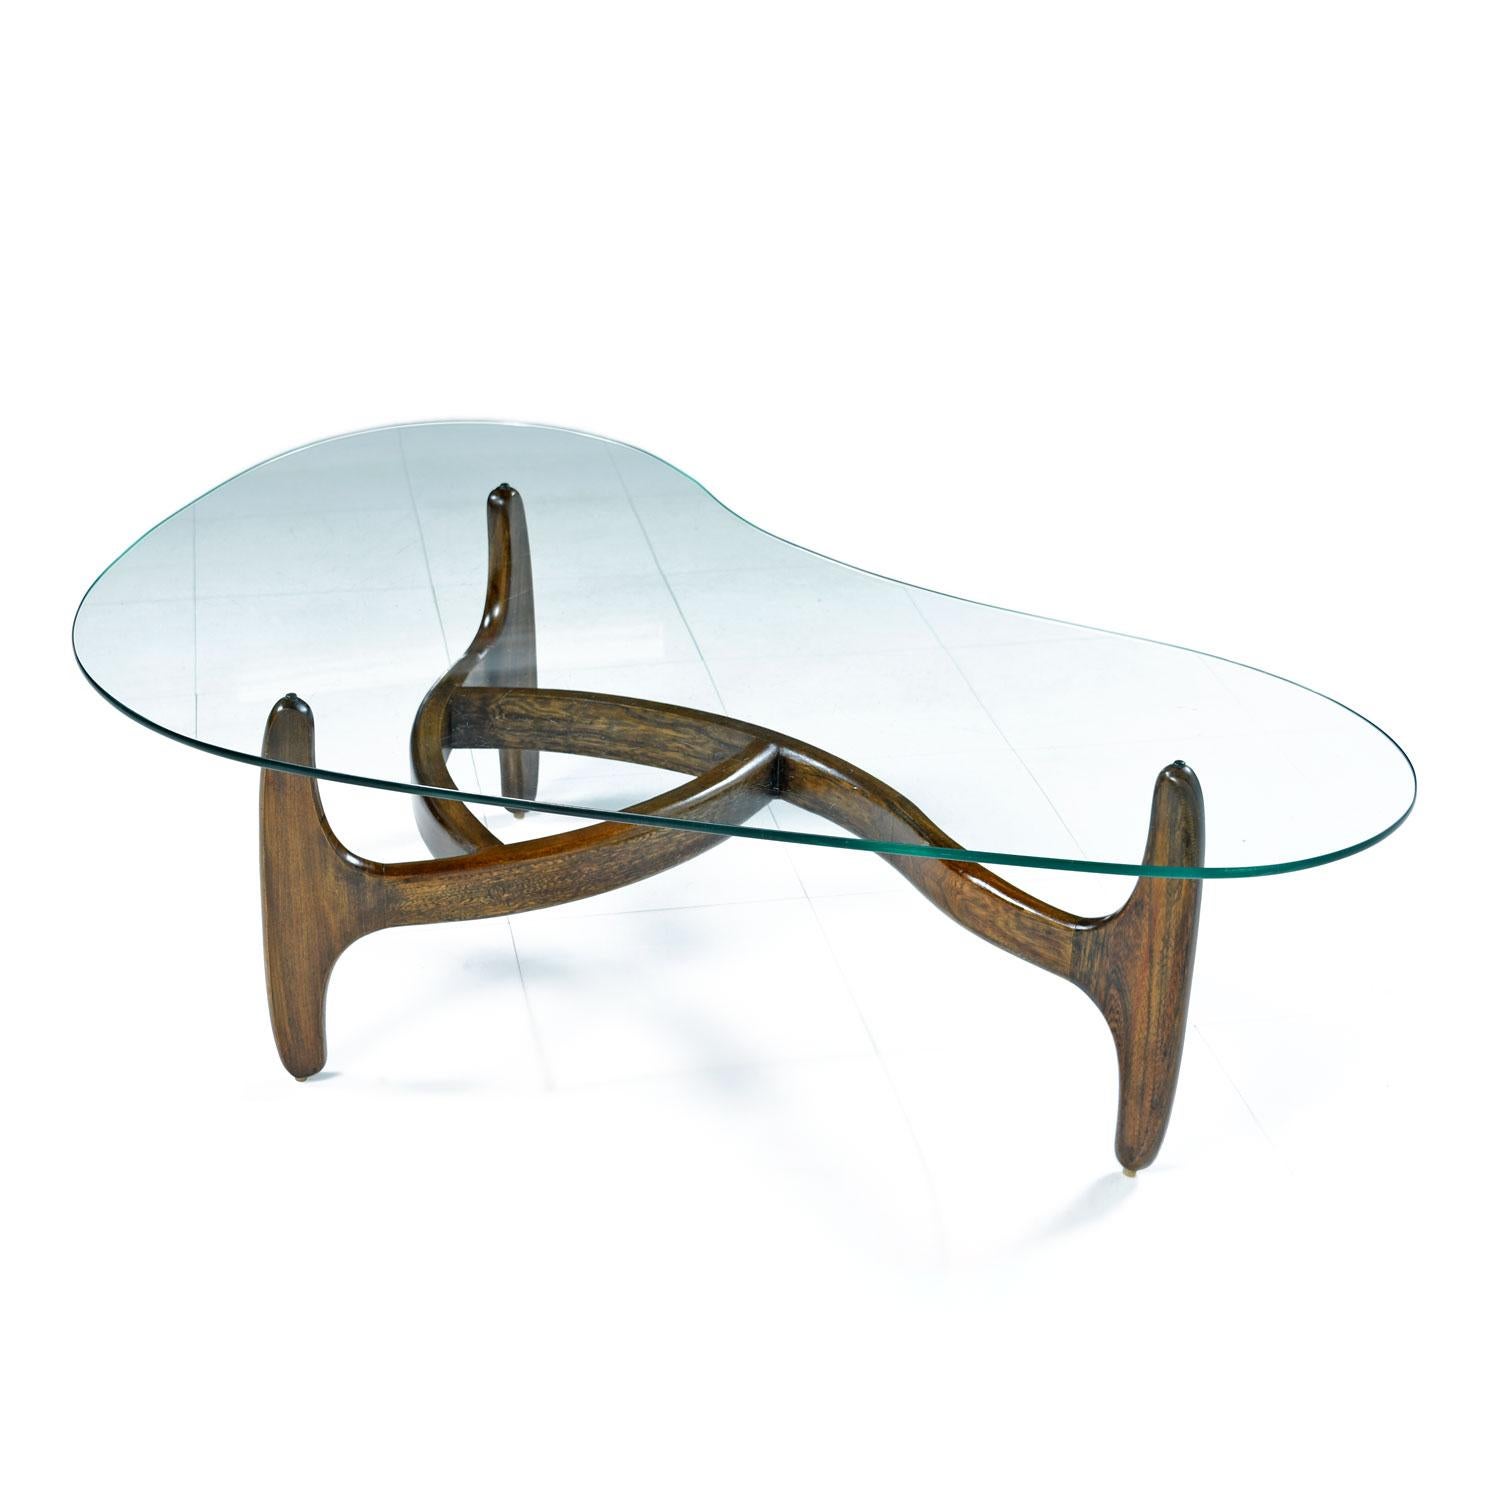 Adrian Pearsall coffee table by Craft Associates. One of Americas most revered designers. Spectacular angular solid oak base with curved, amorphic kidney bean shaped glass.

The solid oak base is in excellent restored vintage condition. The oily